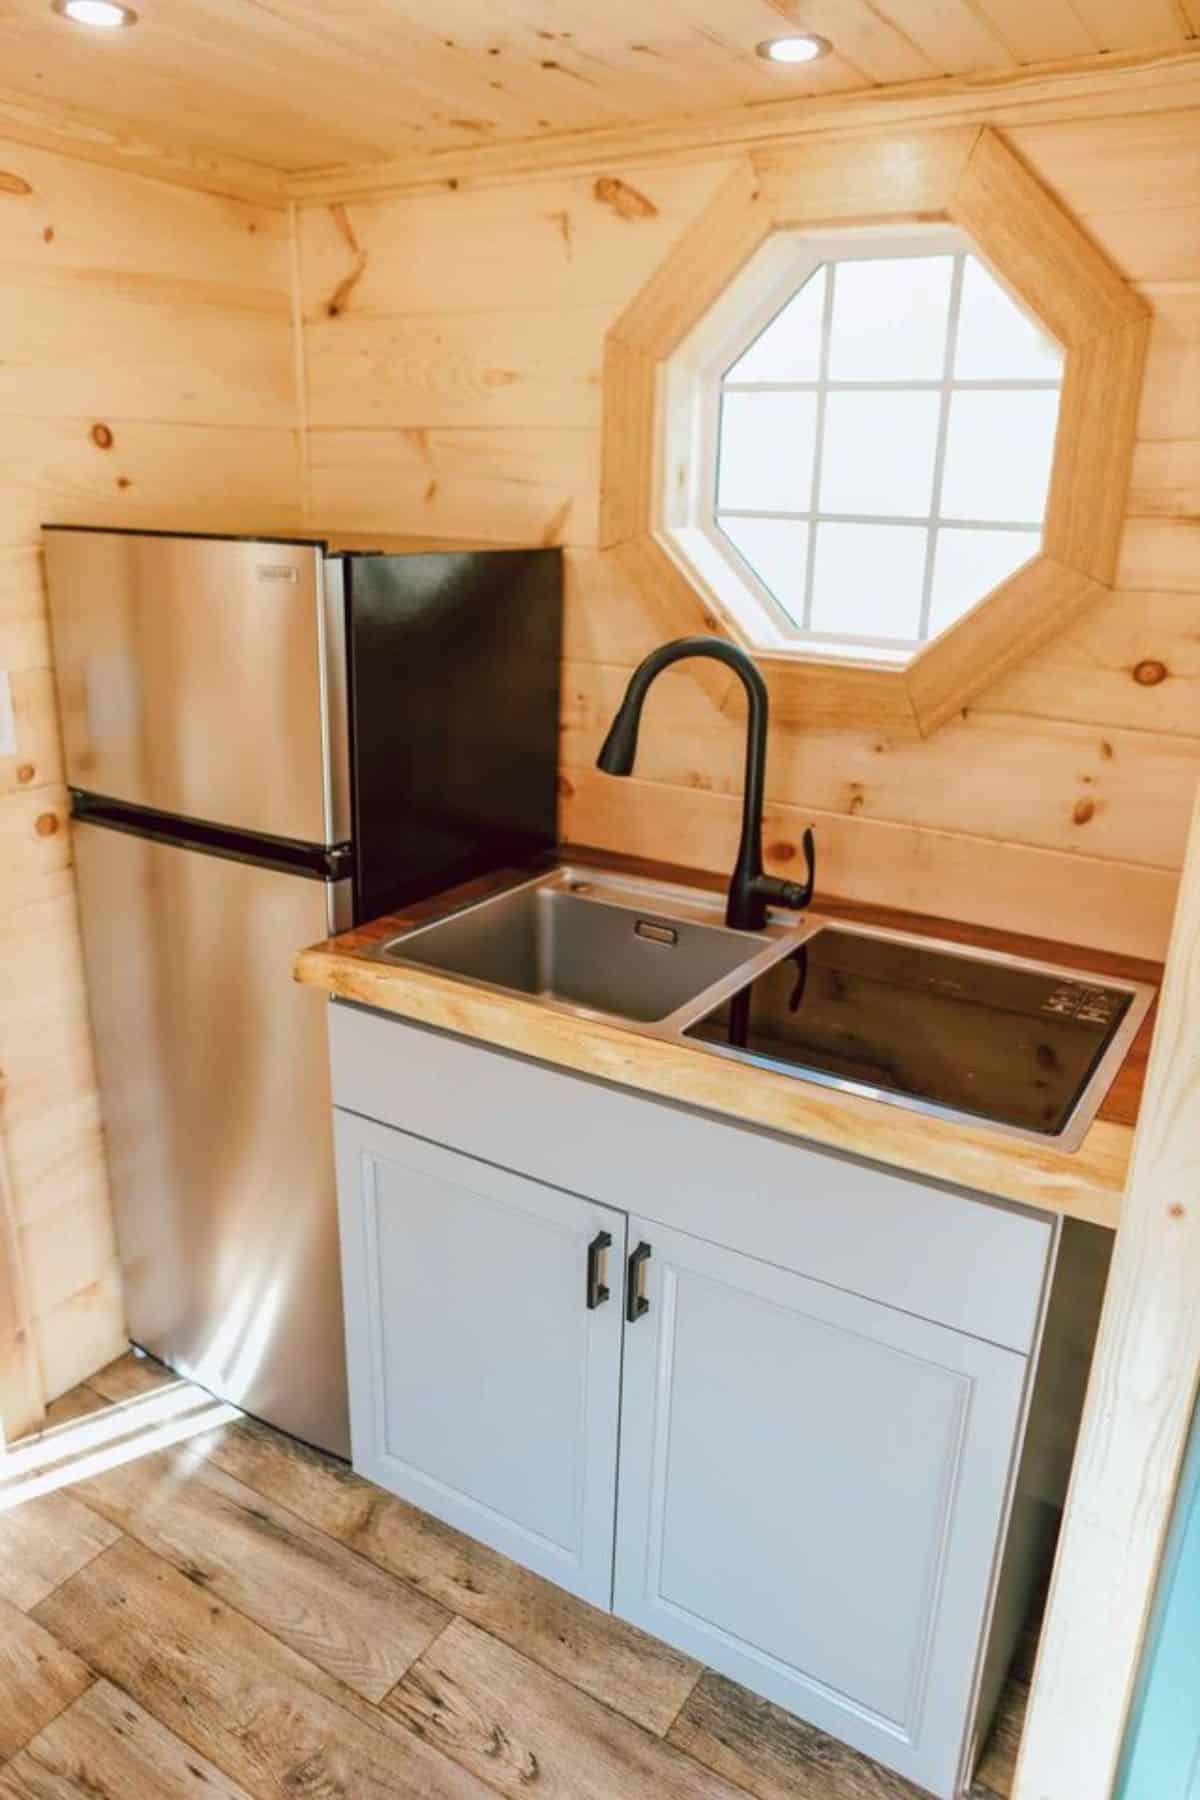 double door refrigerator and stainless steel sink is installed in the kitchen area of spacious tiny house on wheels